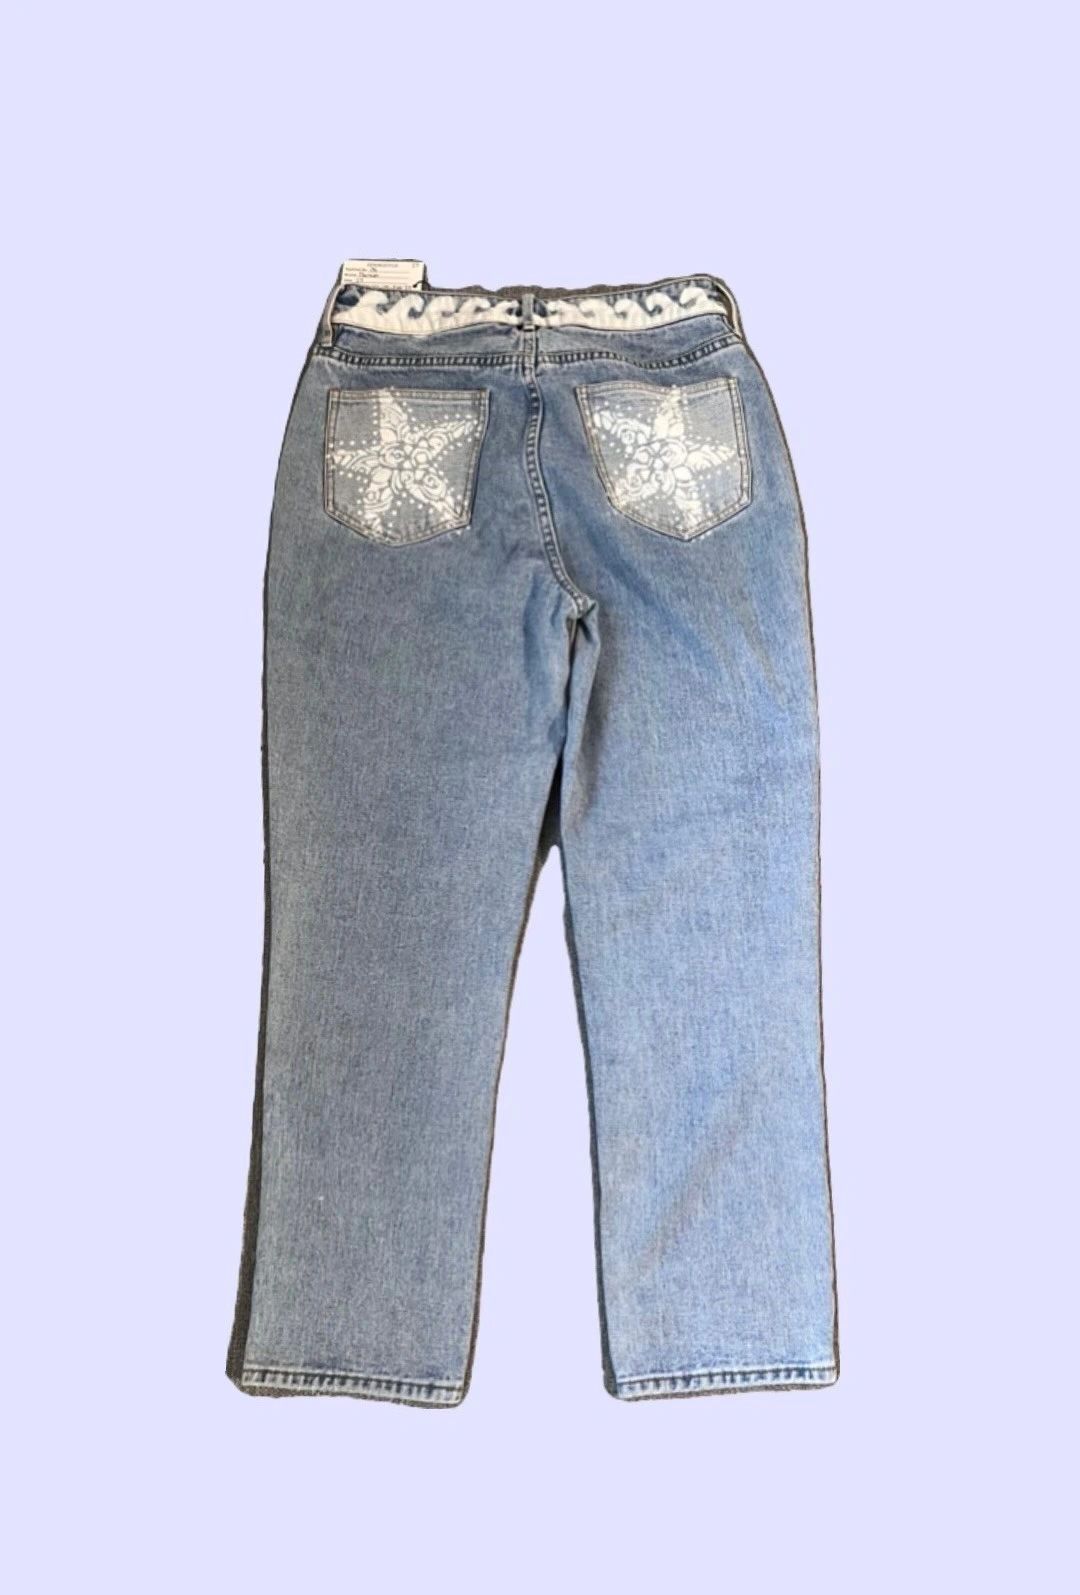 PacSun Patchwork StarFish MOM Jeans ~ Size 27